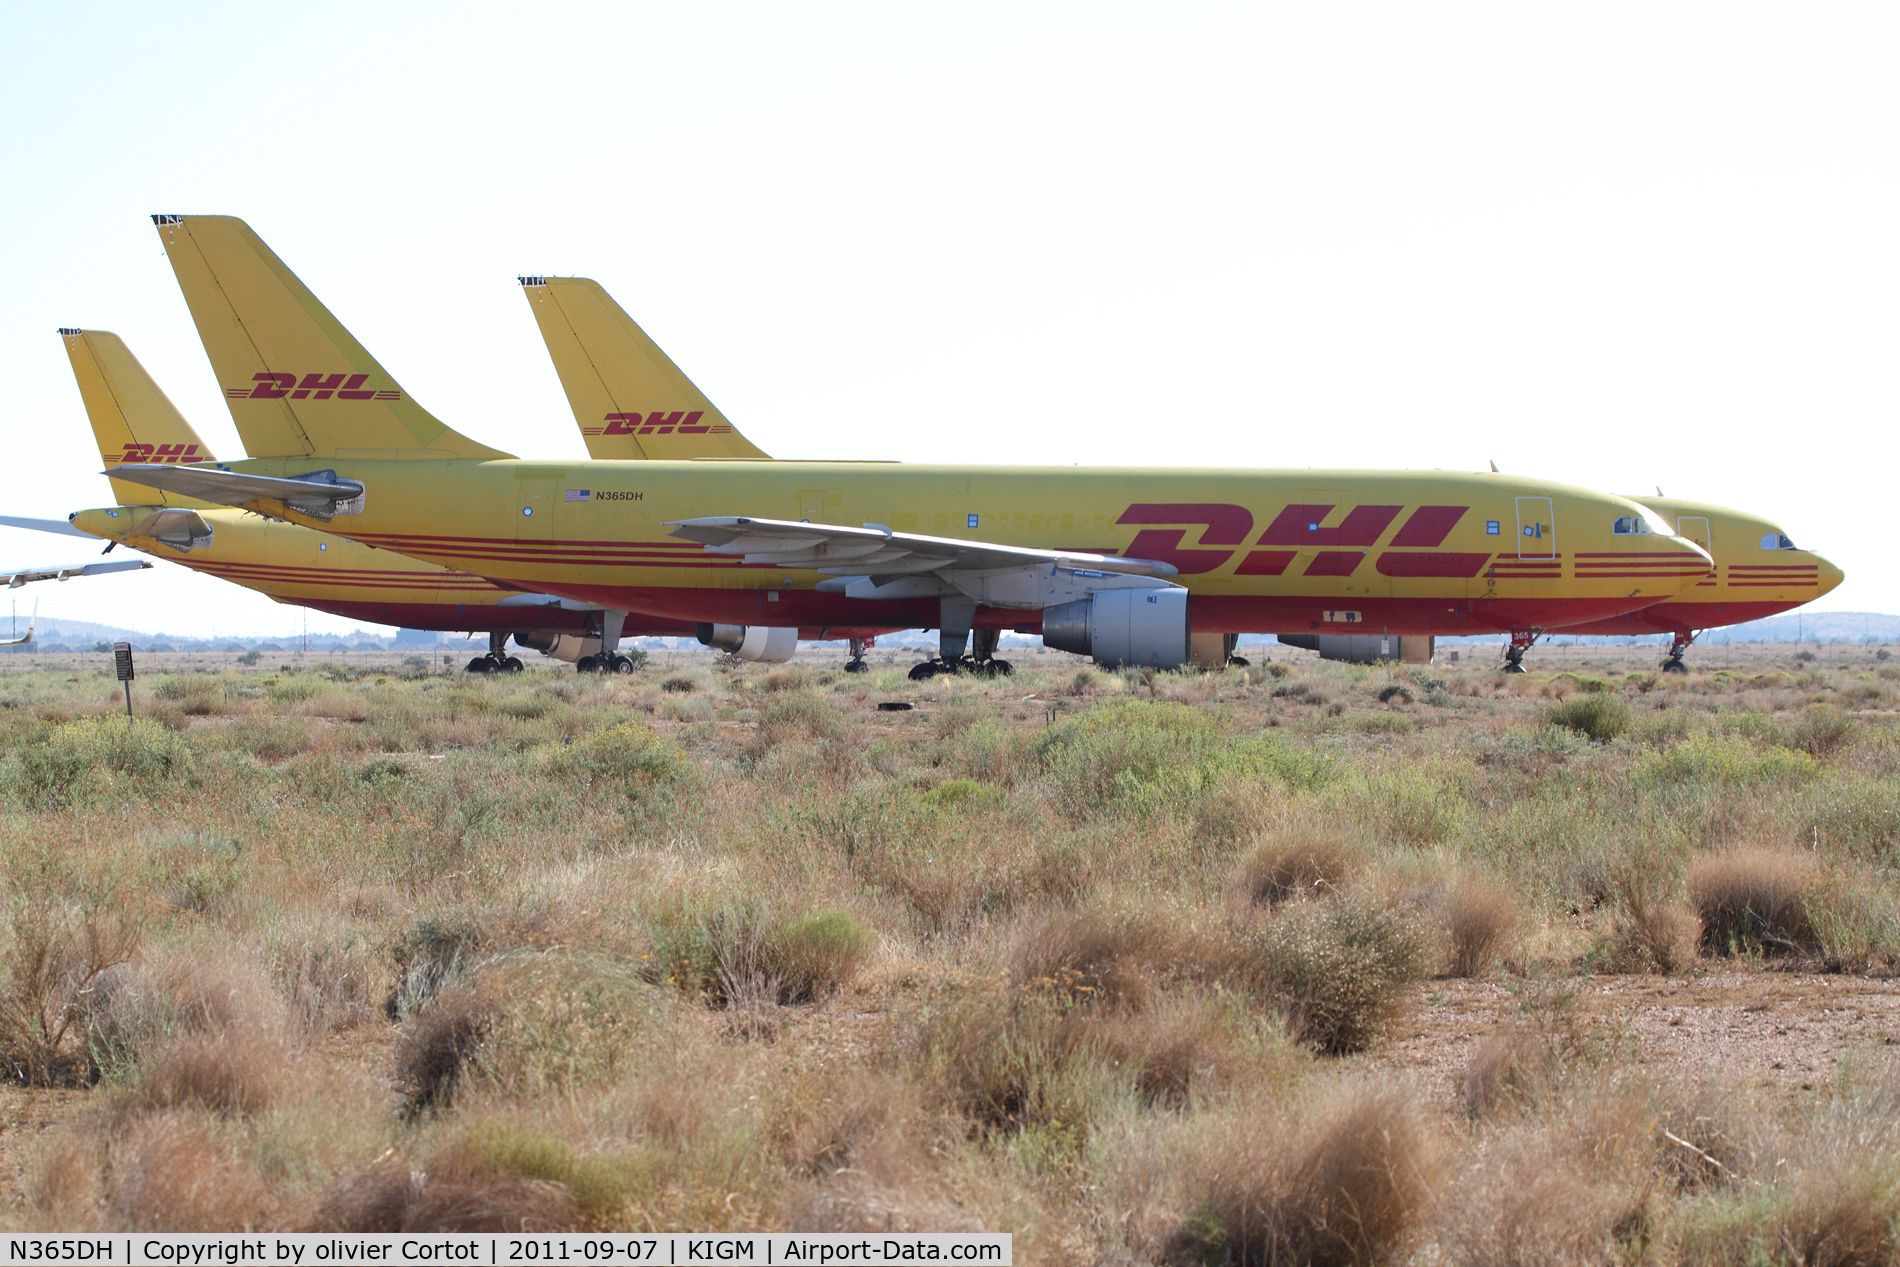 N365DH, 1981 Airbus A300B4-203 C/N 149, A lot of MDs are parked in Kingman, but there is also some Airbus planes